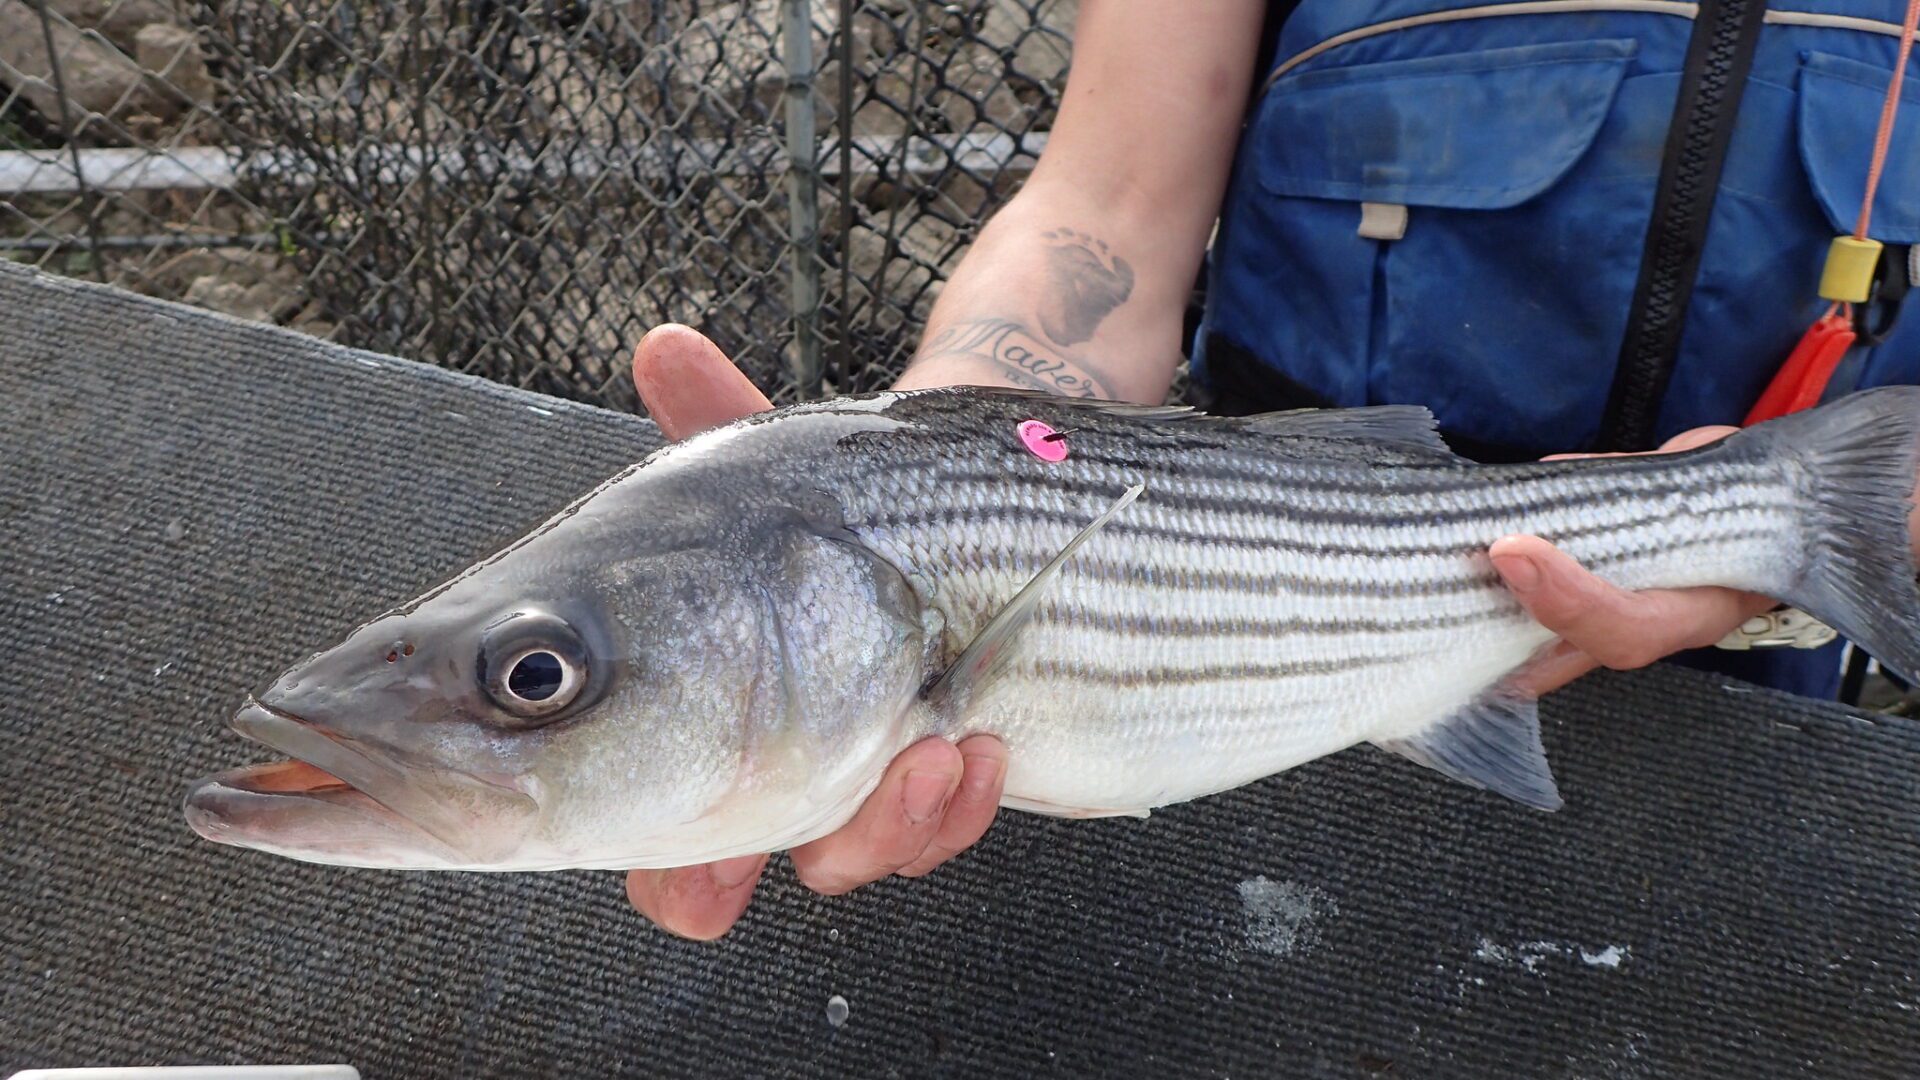 Striped bass with pink disc tag